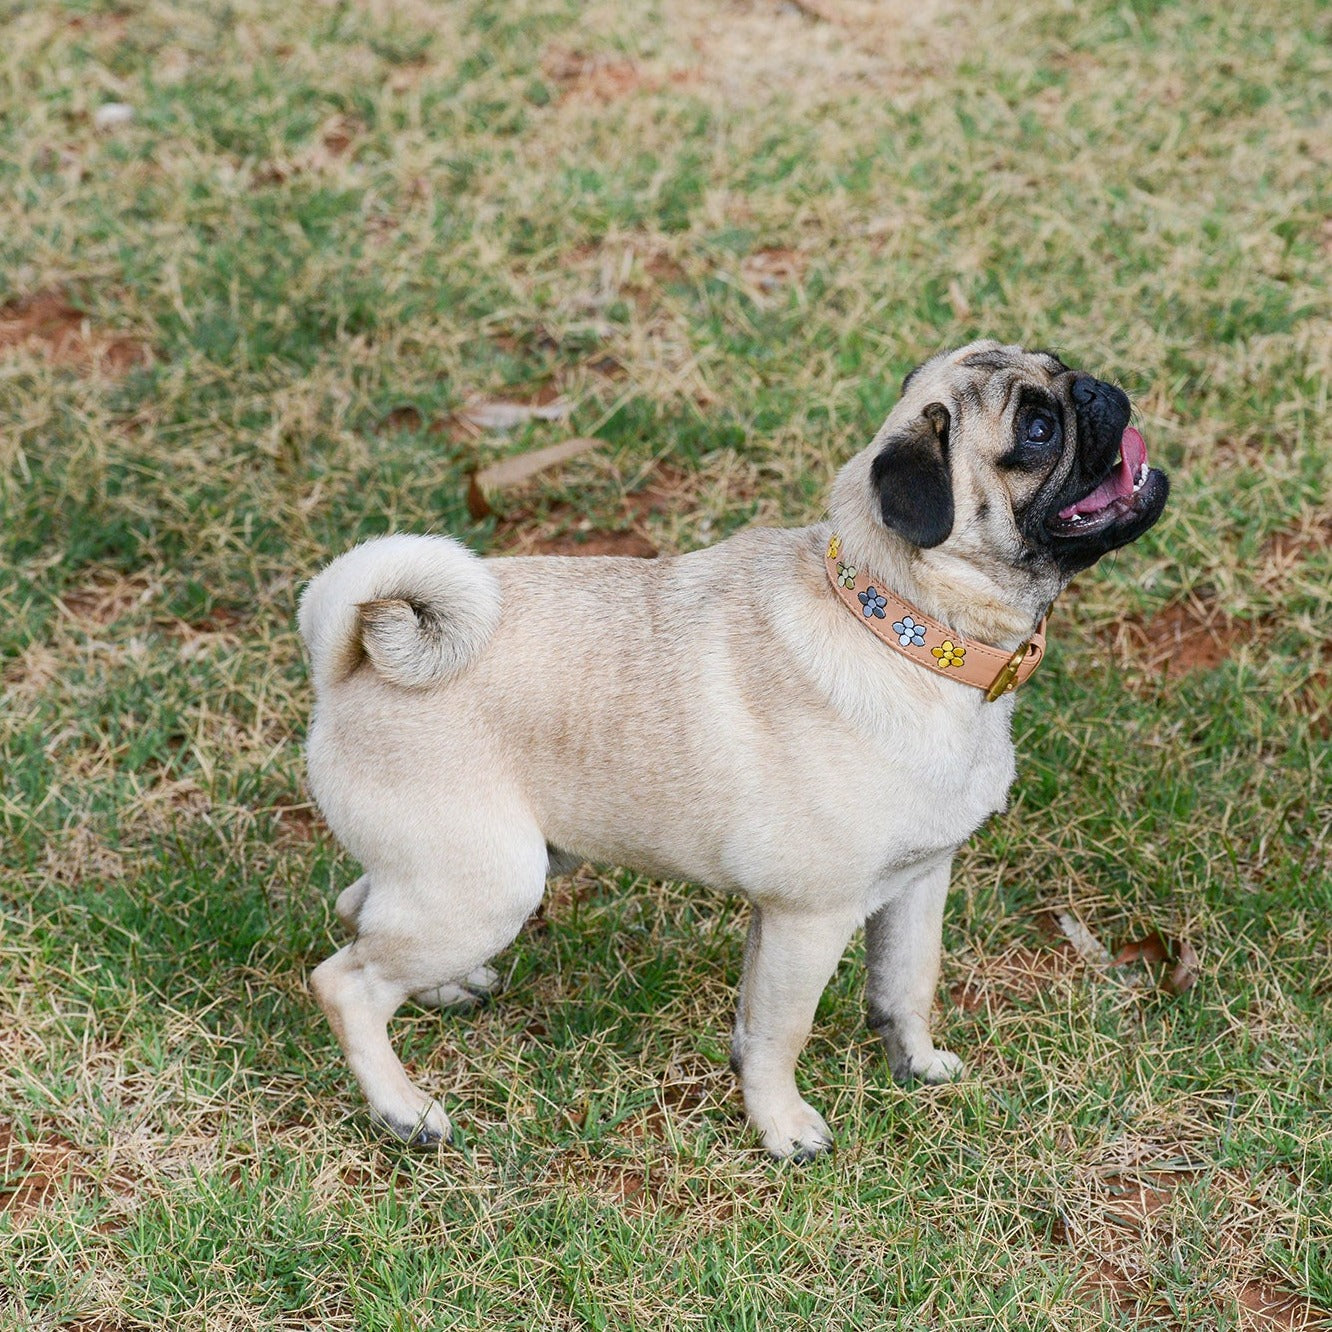 A fawn-colored pug wearing a Georgie Paws Winny Collar stands attentively on patchy green grass, tongue slightly out, possibly intrigued by sights or sounds at the park.